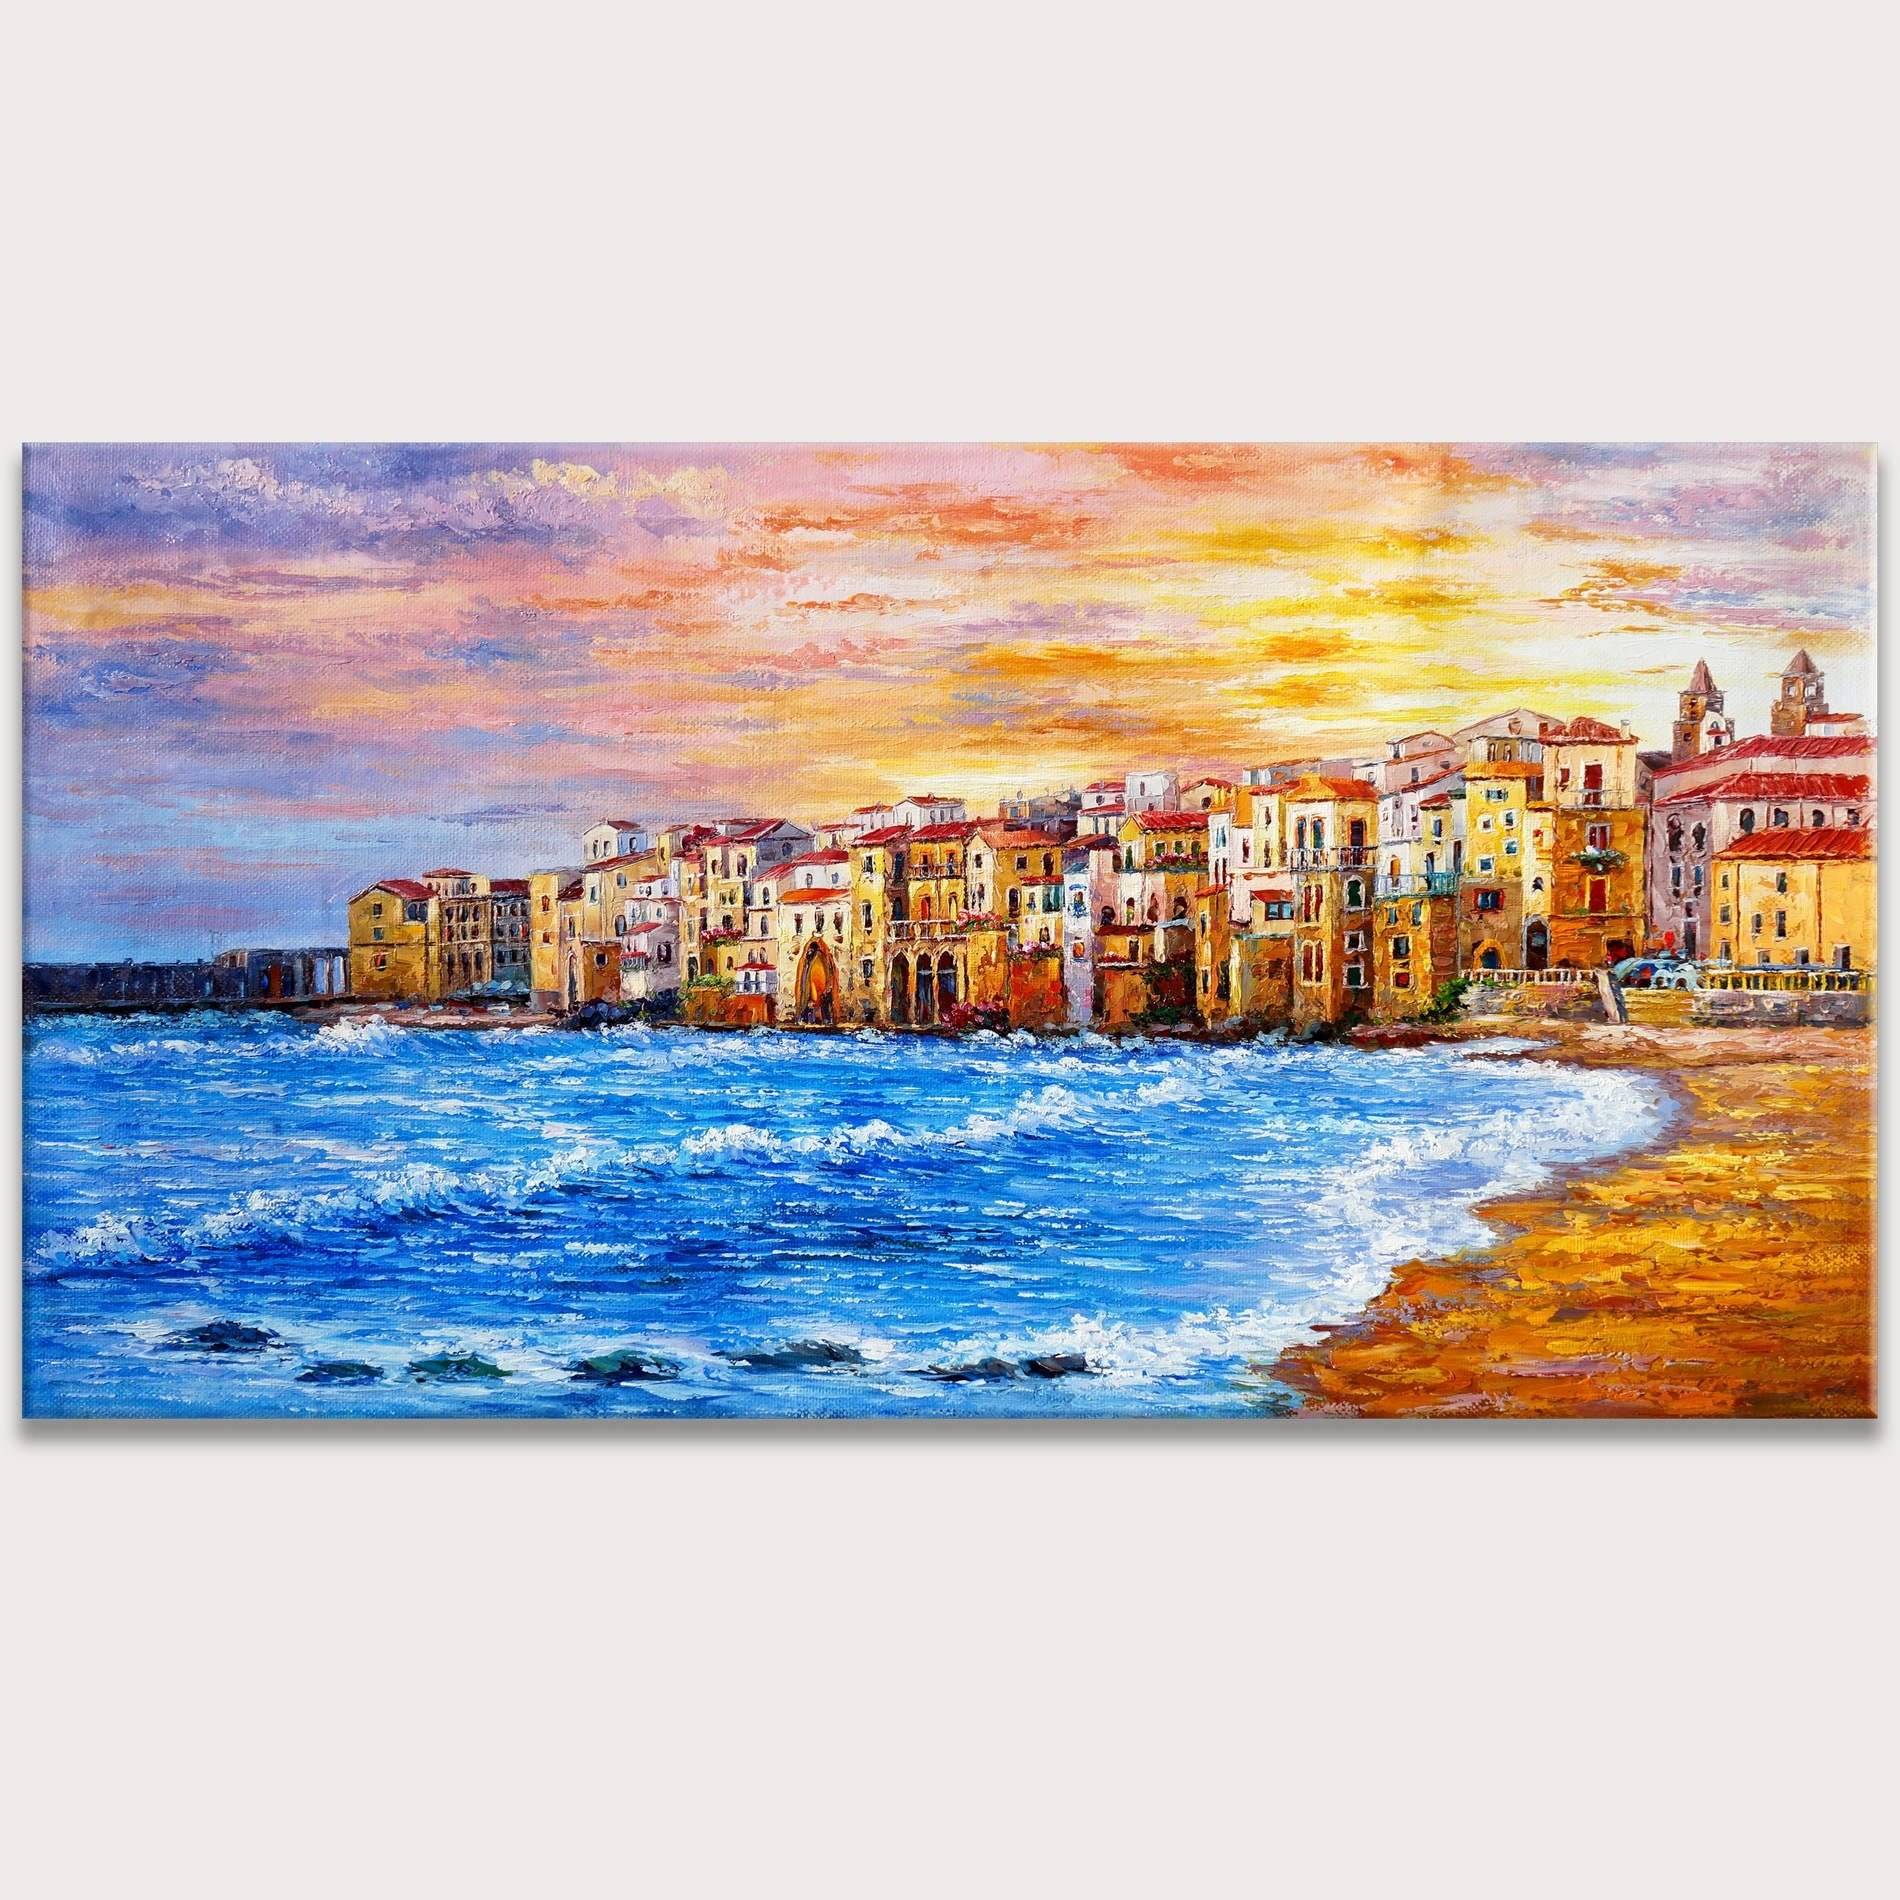 Hand painted Sunset in Cefalù Sicily 60x120cm